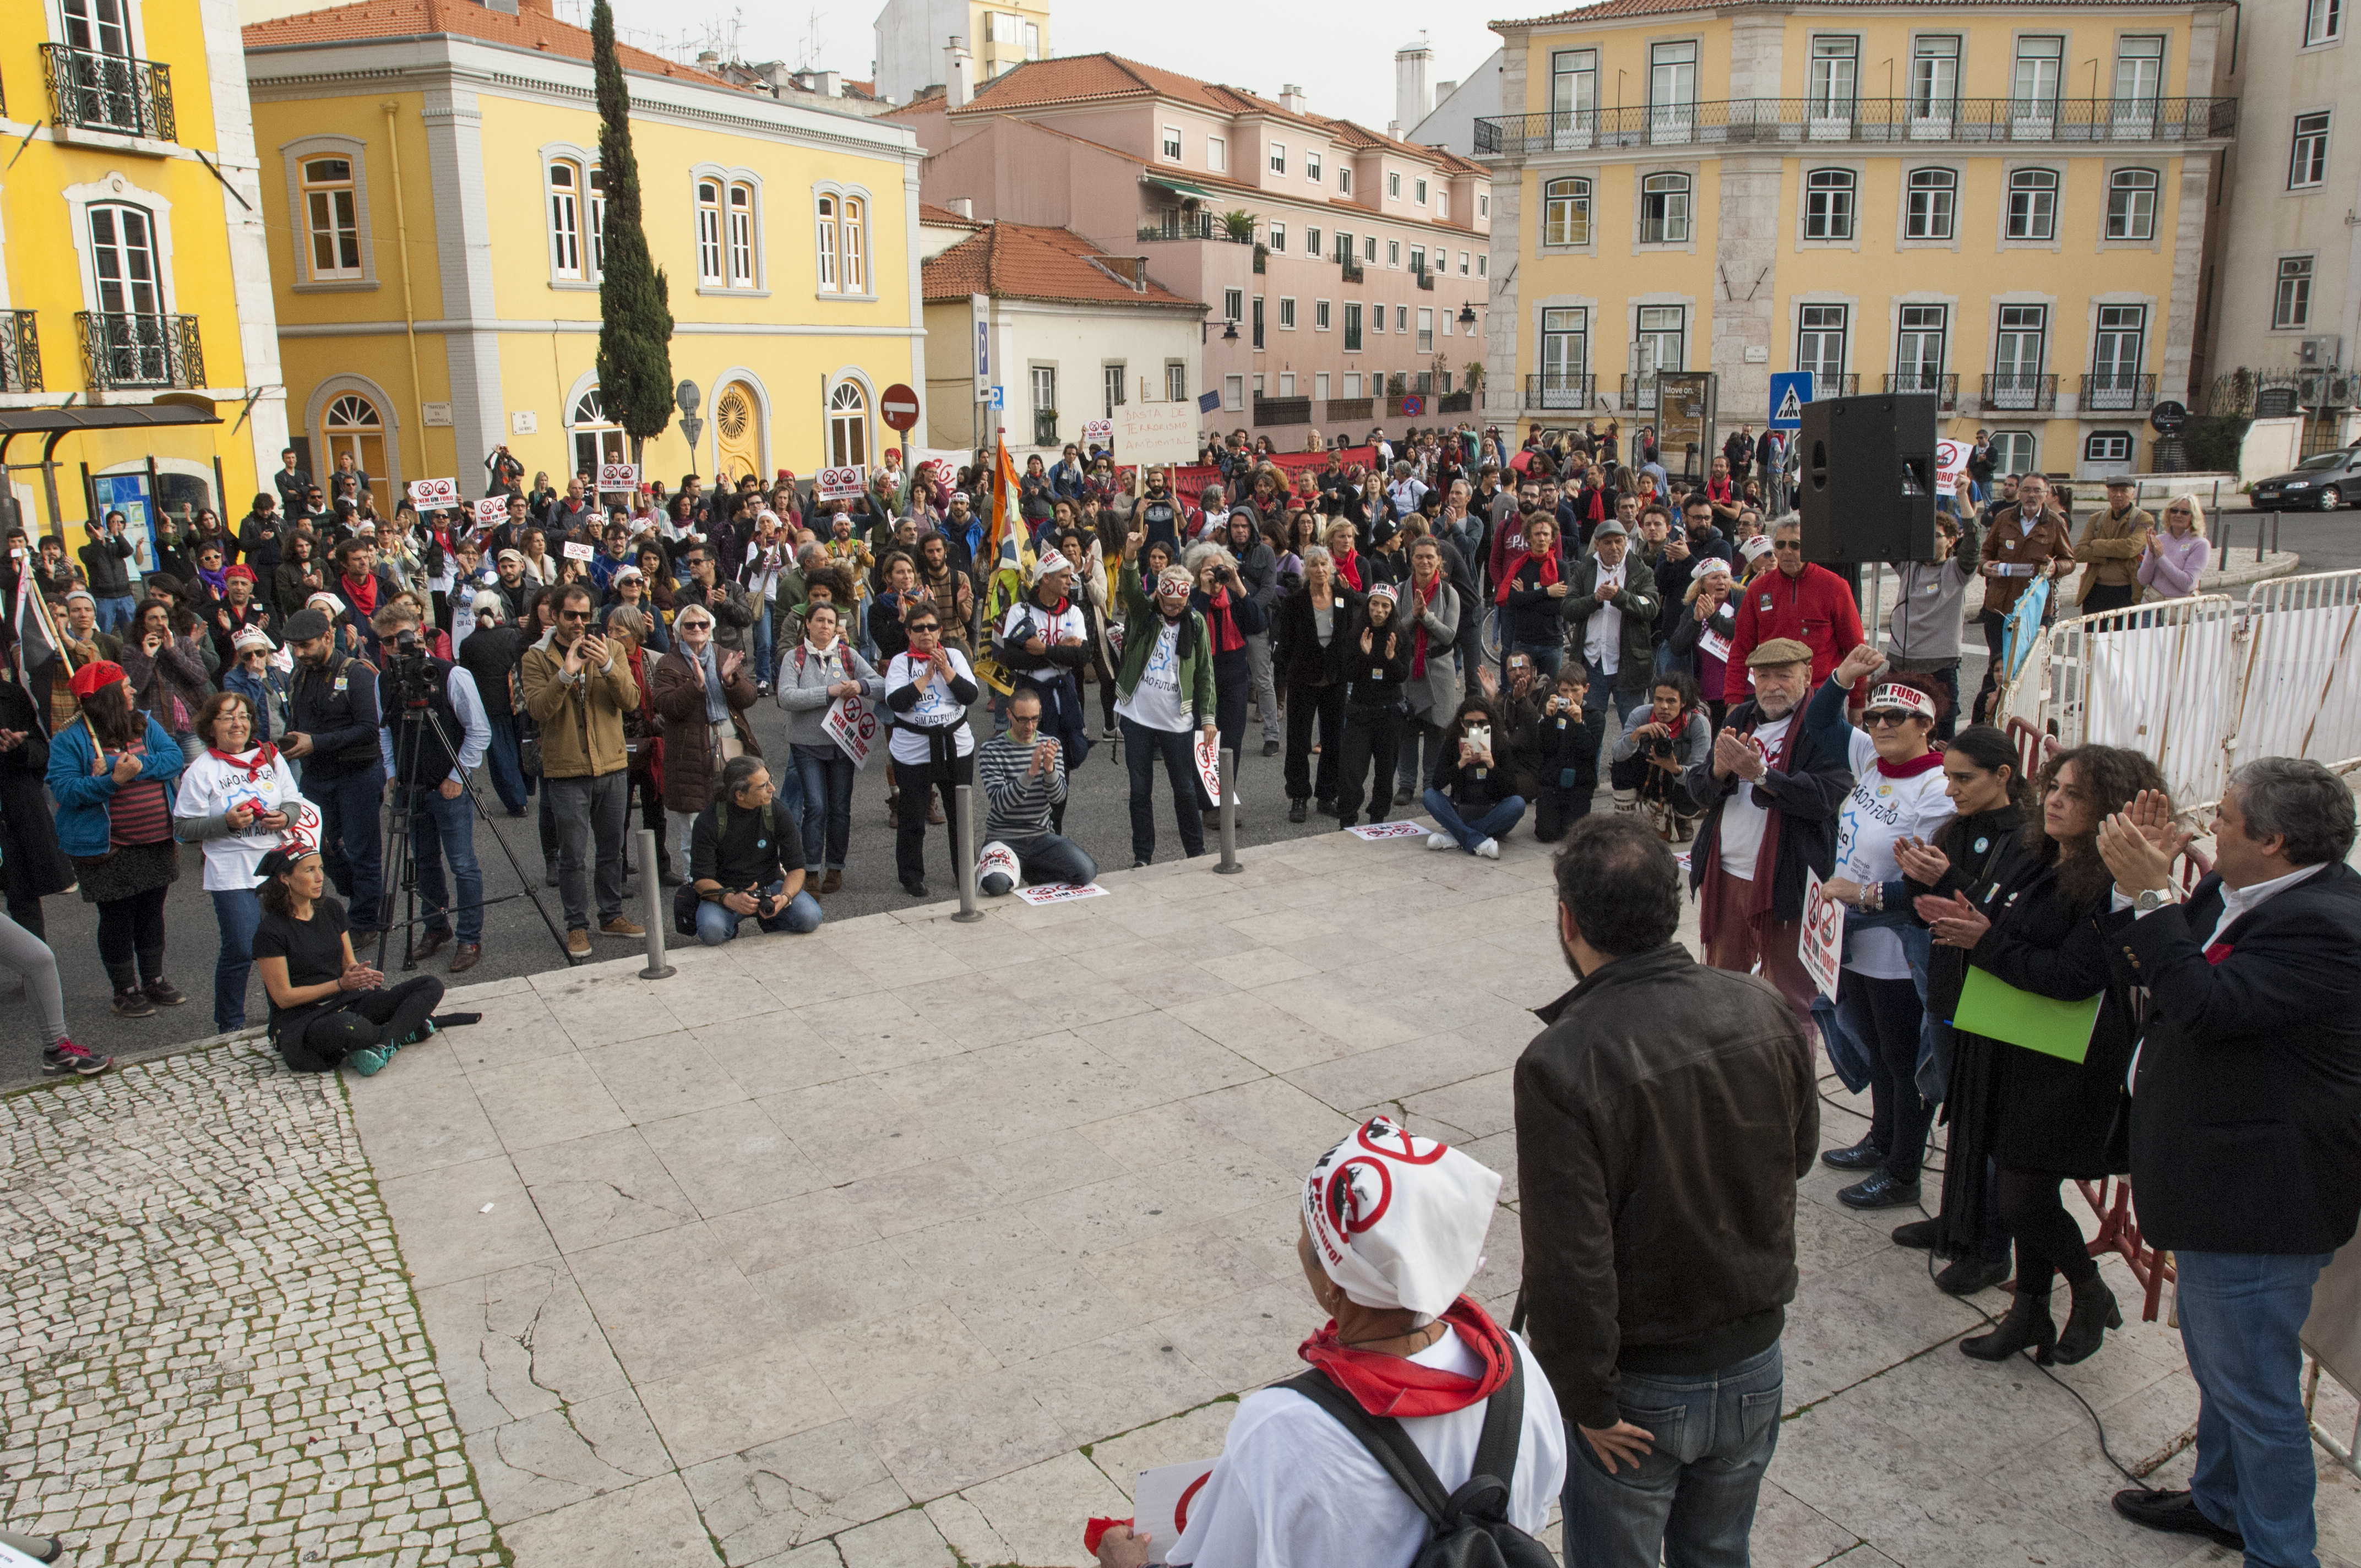 Demonstration in front of the Portuguese parliament in Lisbon, organized by ASMAA, February 23 2017